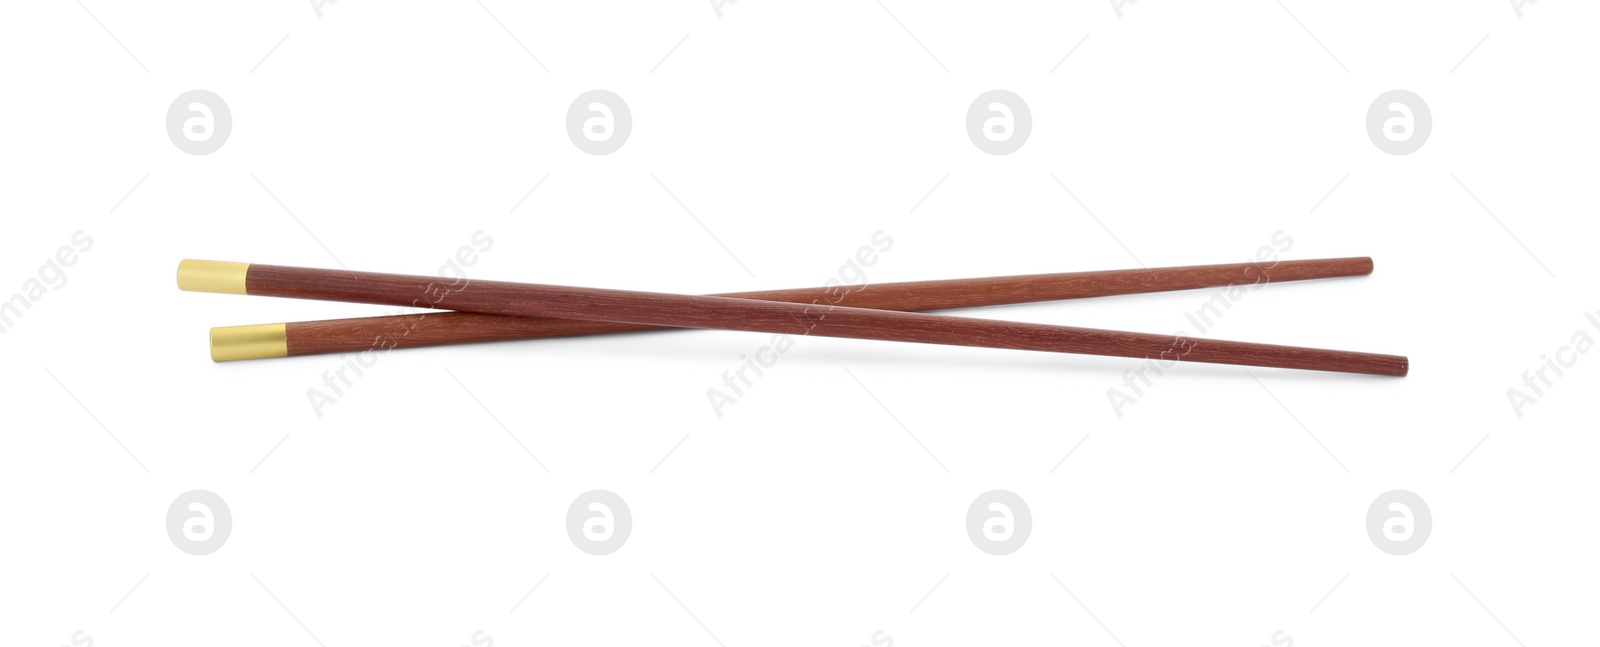 Photo of Pair of wooden chopsticks isolated on white